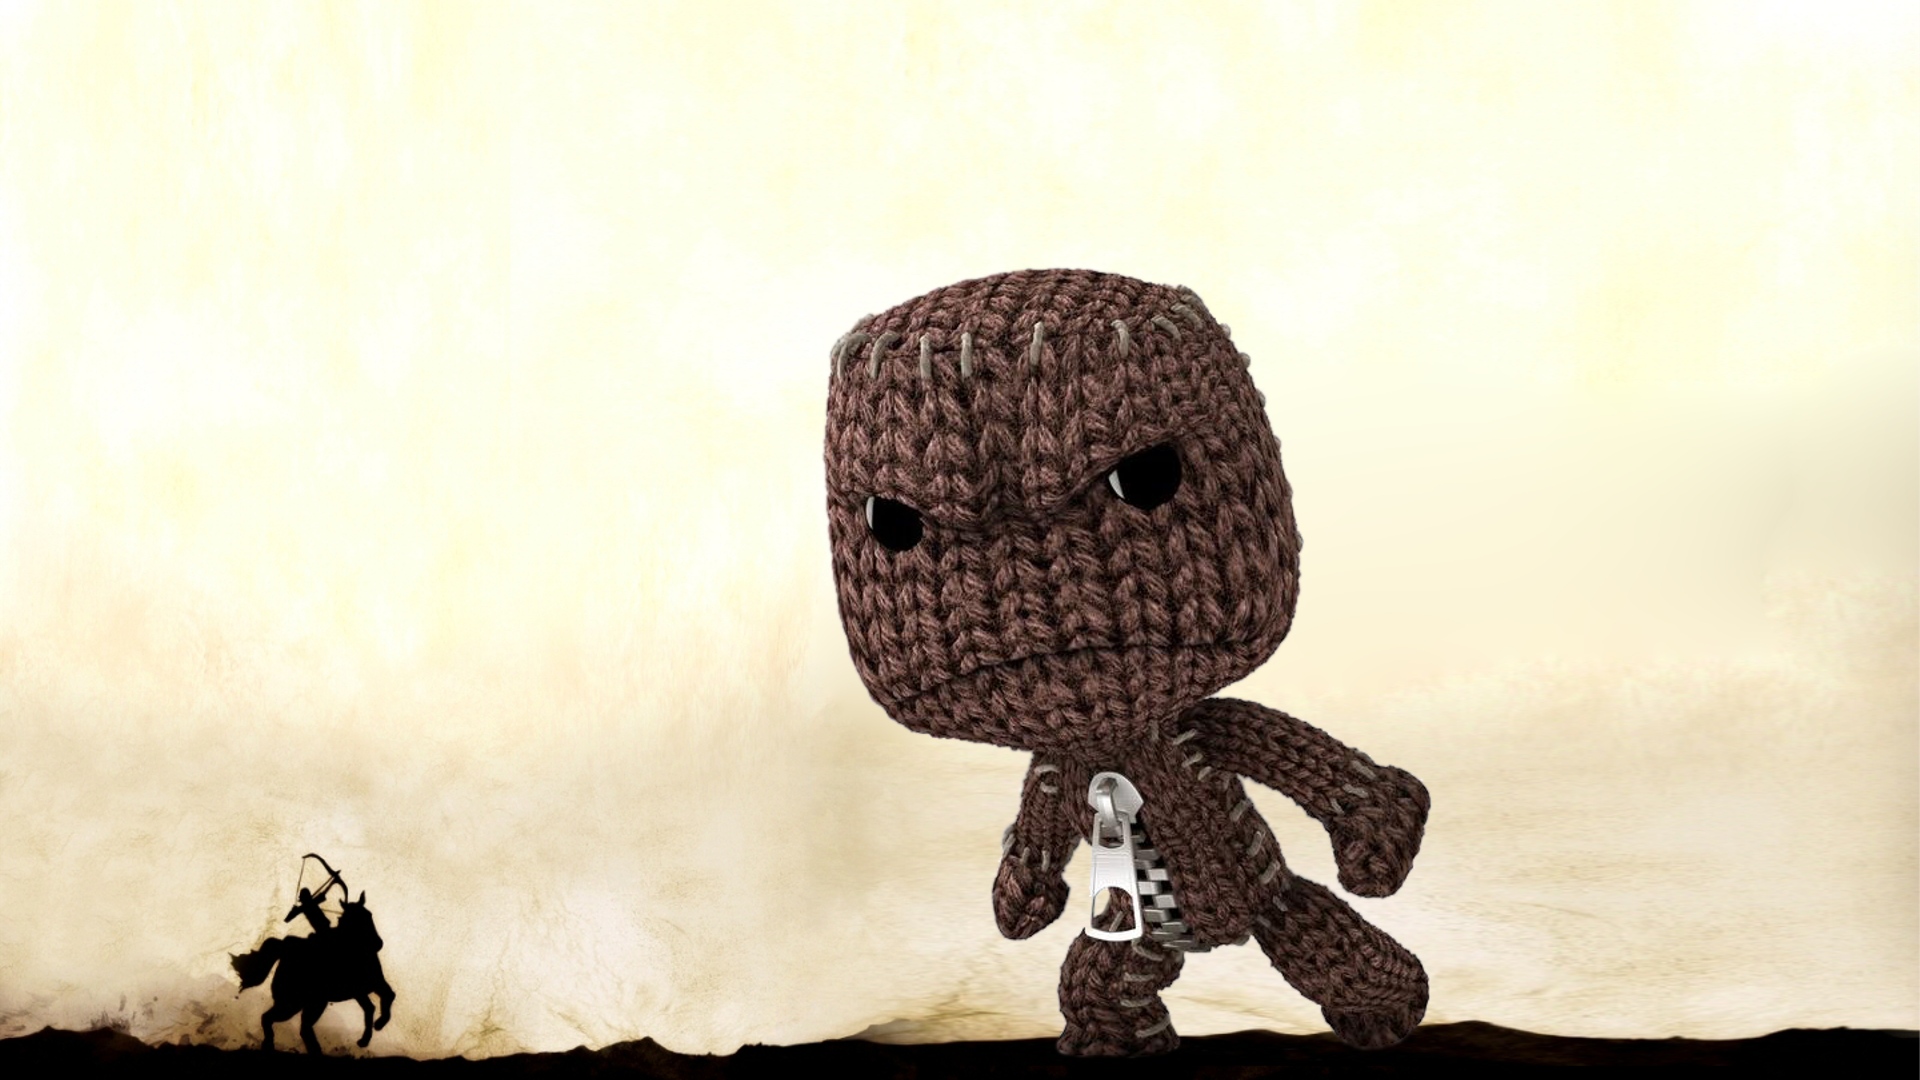 Little Big Pla Sackboy Shadow Of The Colossus Wallpaper Background